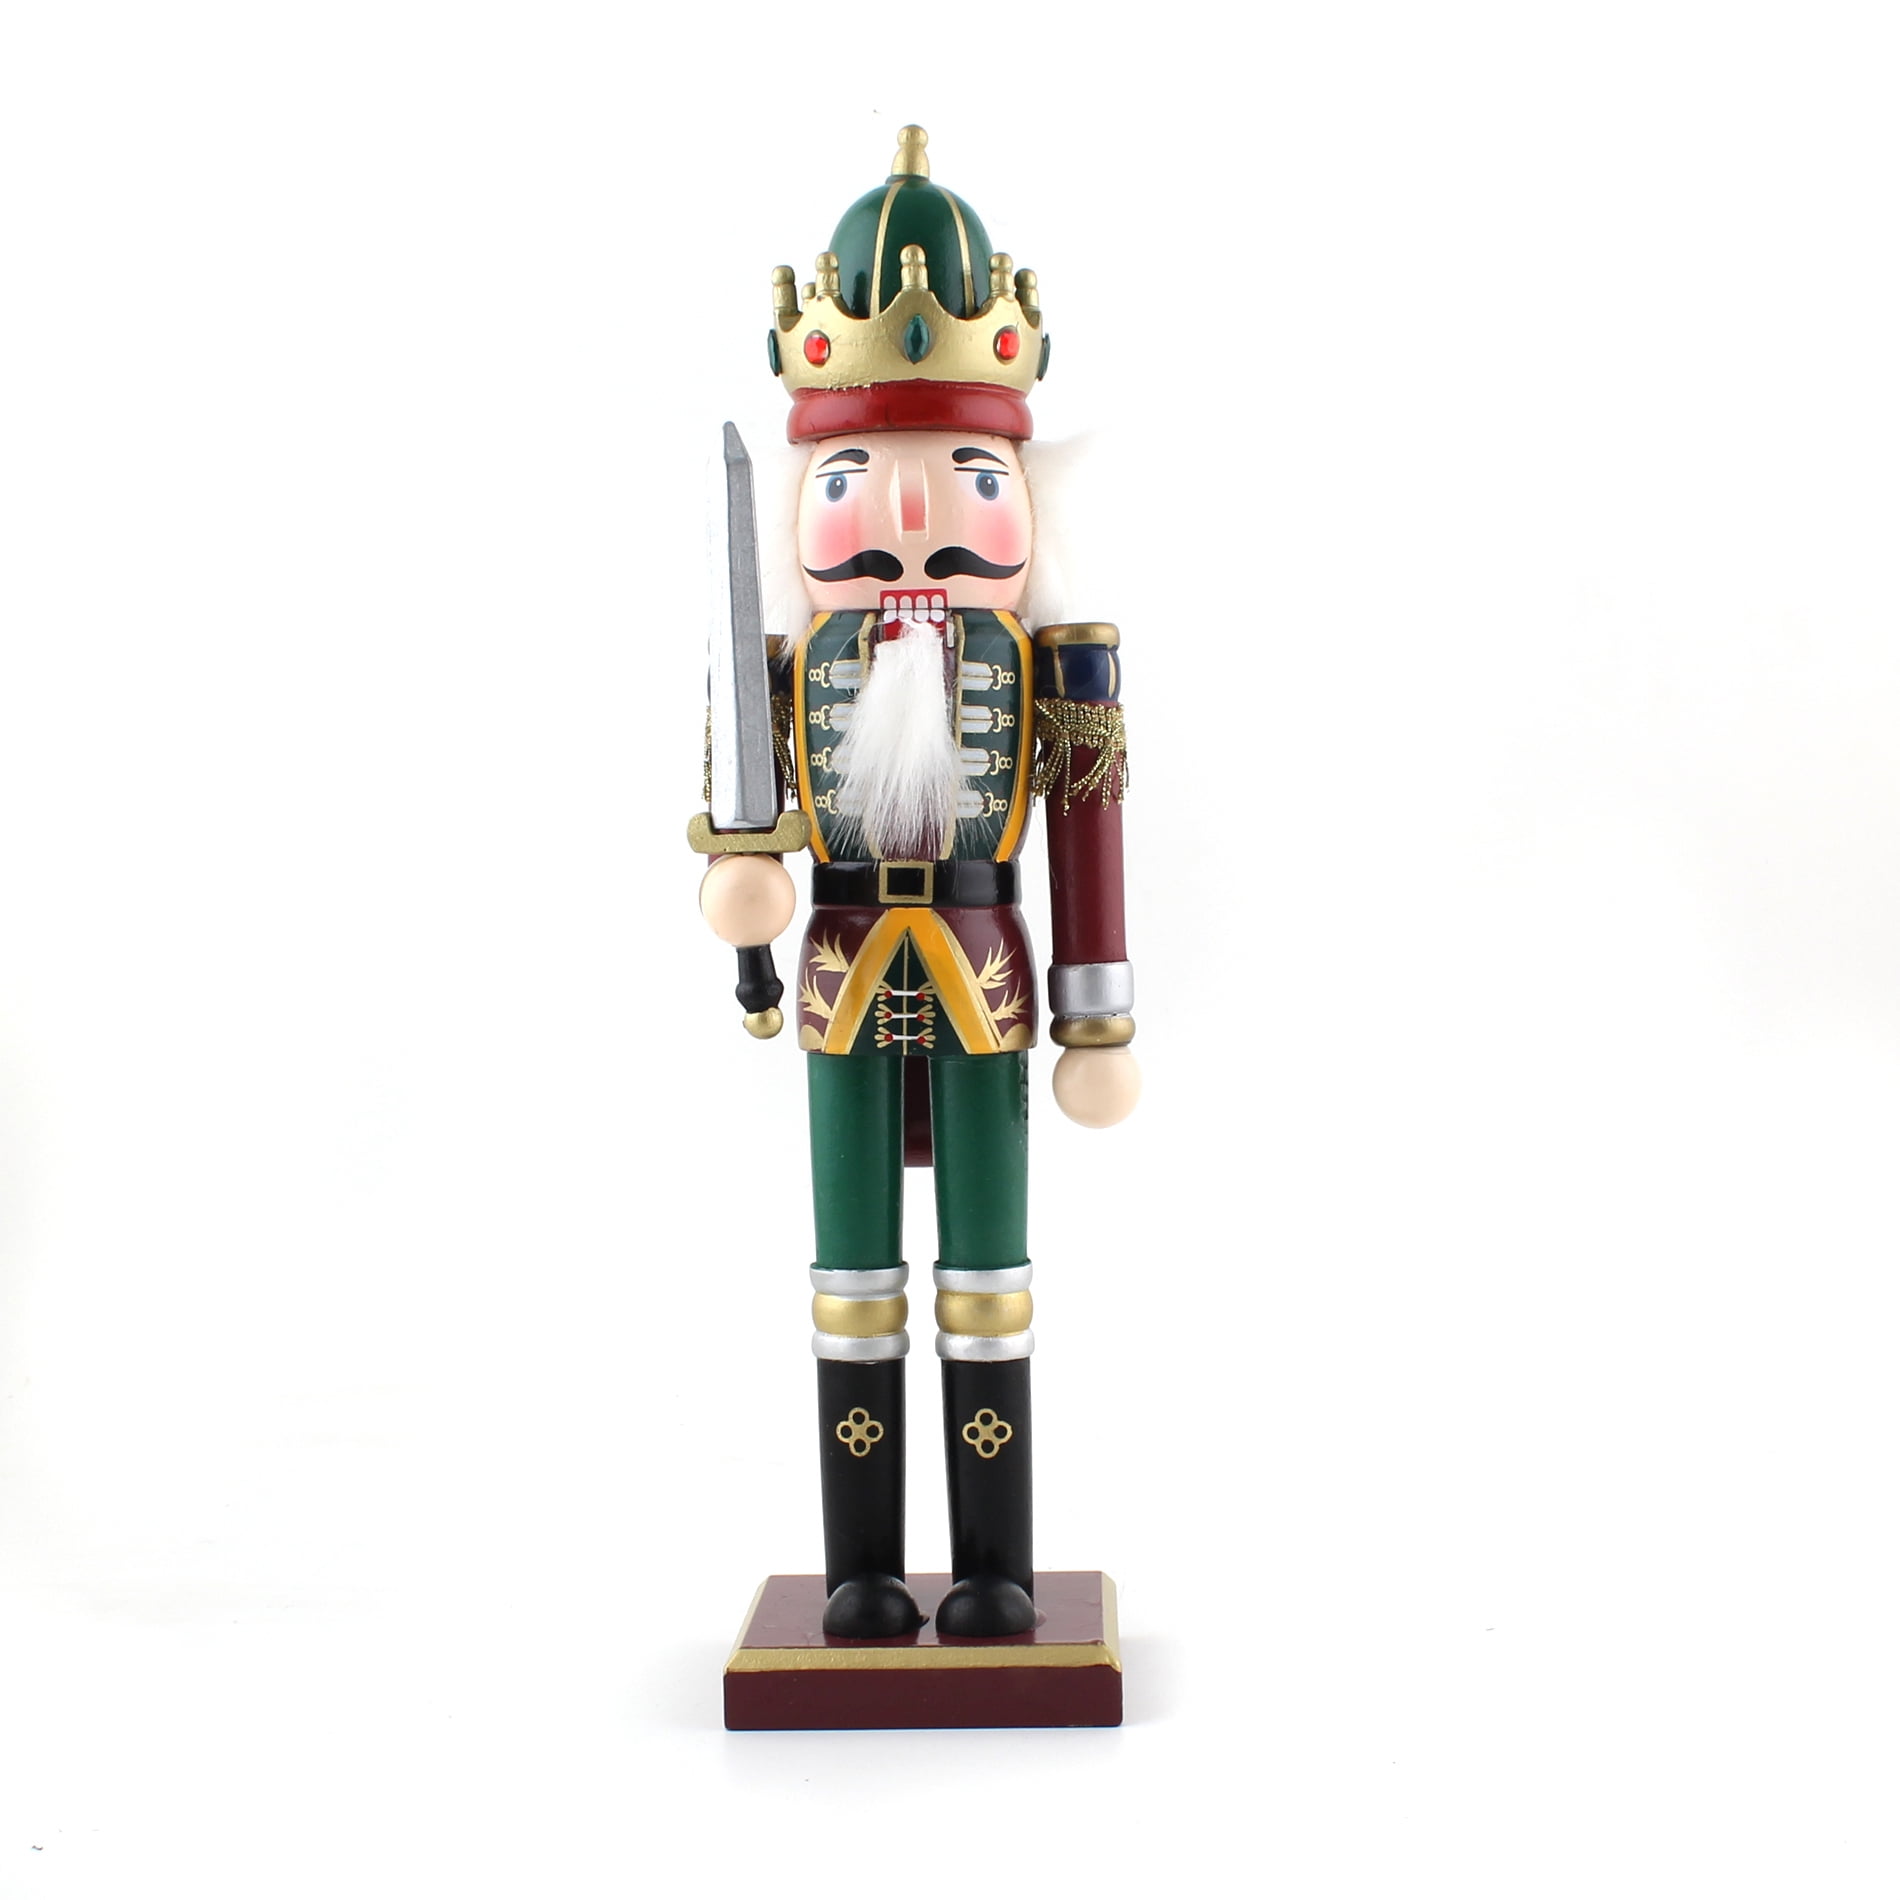 where can you buy nutcrackers